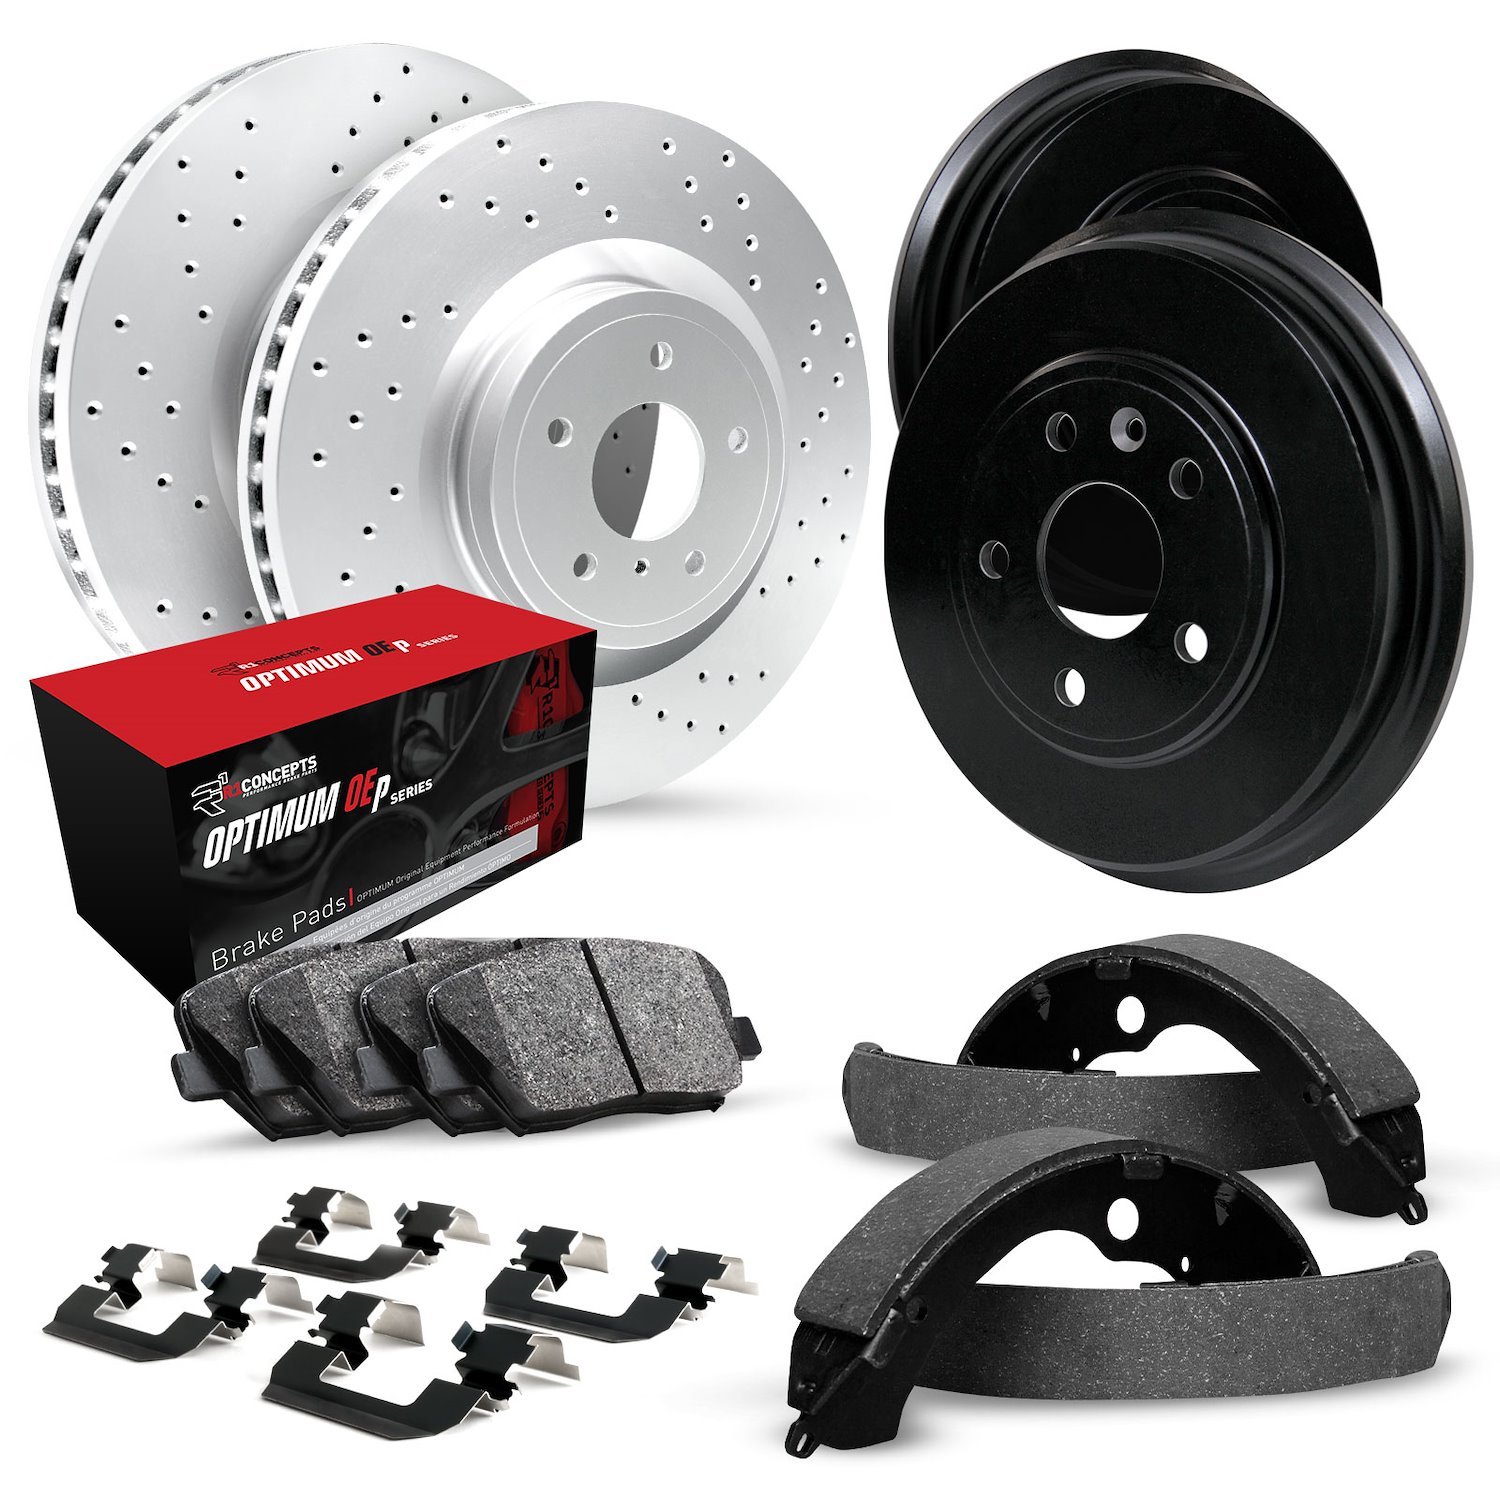 GEO-Carbon Drilled Brake Rotor & Drum Set w/Optimum OE Pads, Shoes, & Hardware, 1981-1984 GM, Position: Front & Rear